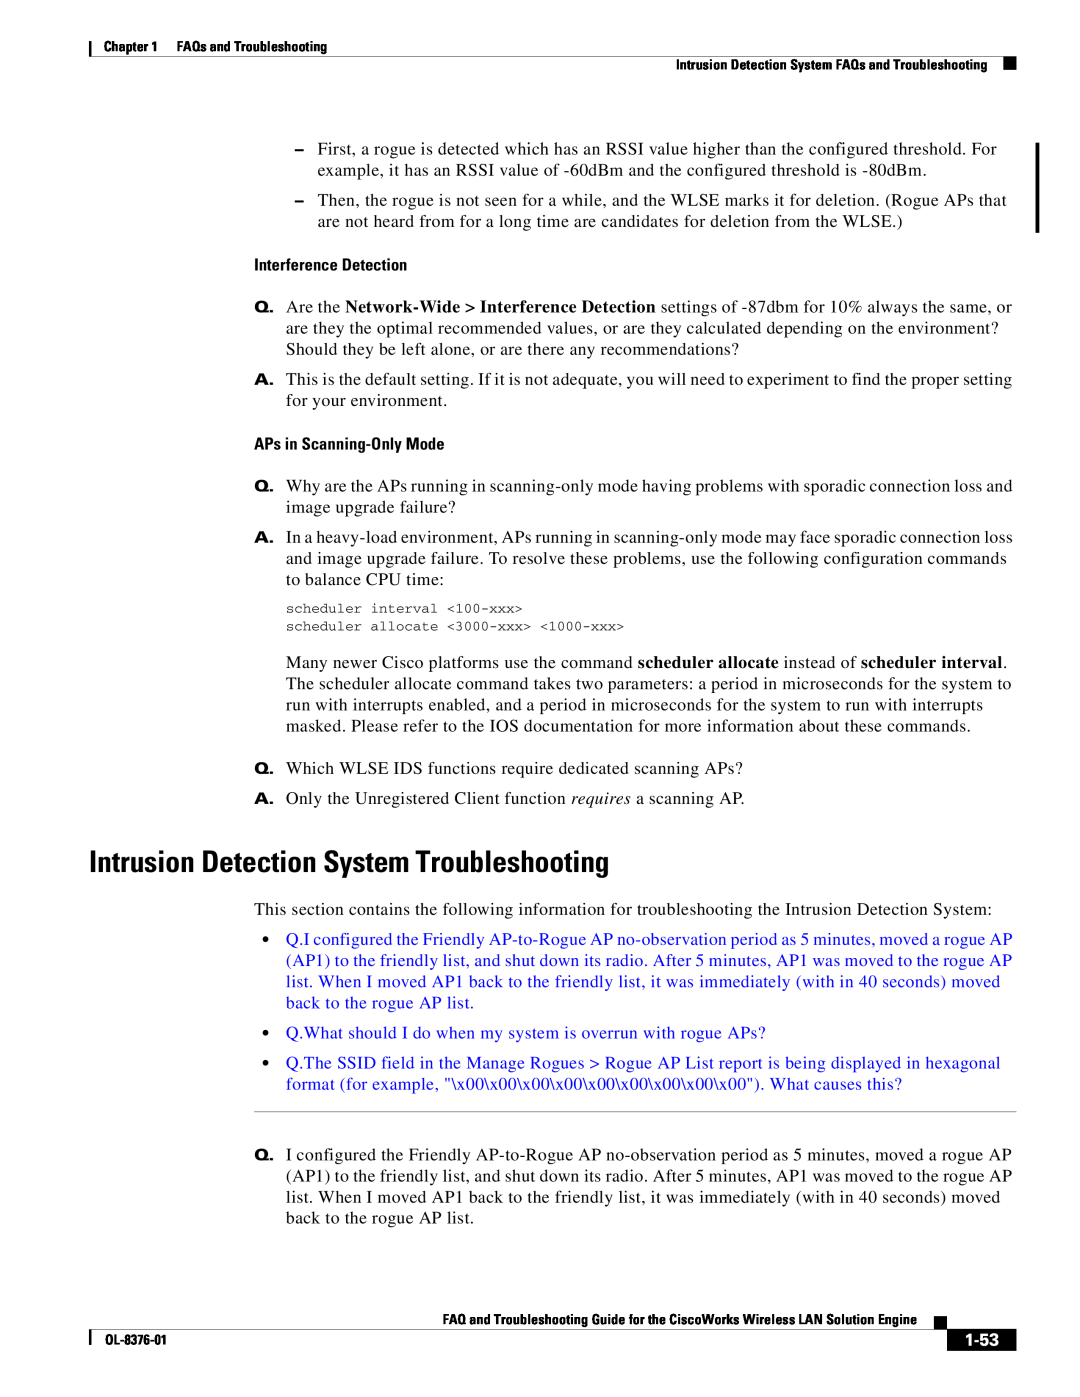 Cisco Systems OL-8376-01 manual Intrusion Detection System Troubleshooting, 1-53, Interference Detection 